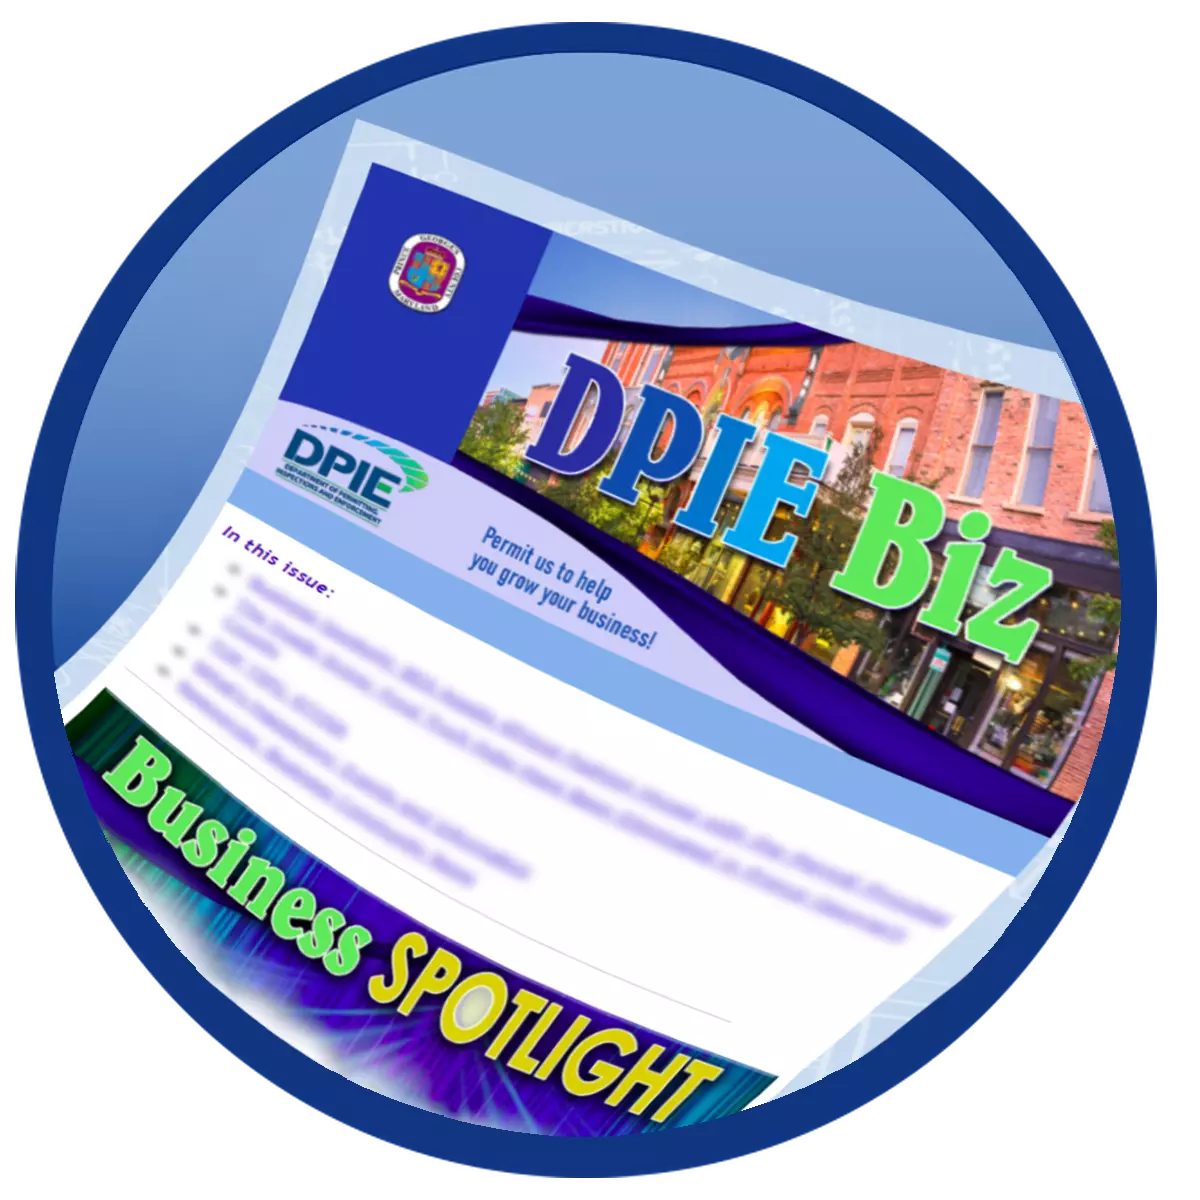 Business Development Section's Newsletter Icon of the DPIE Biz words masthead